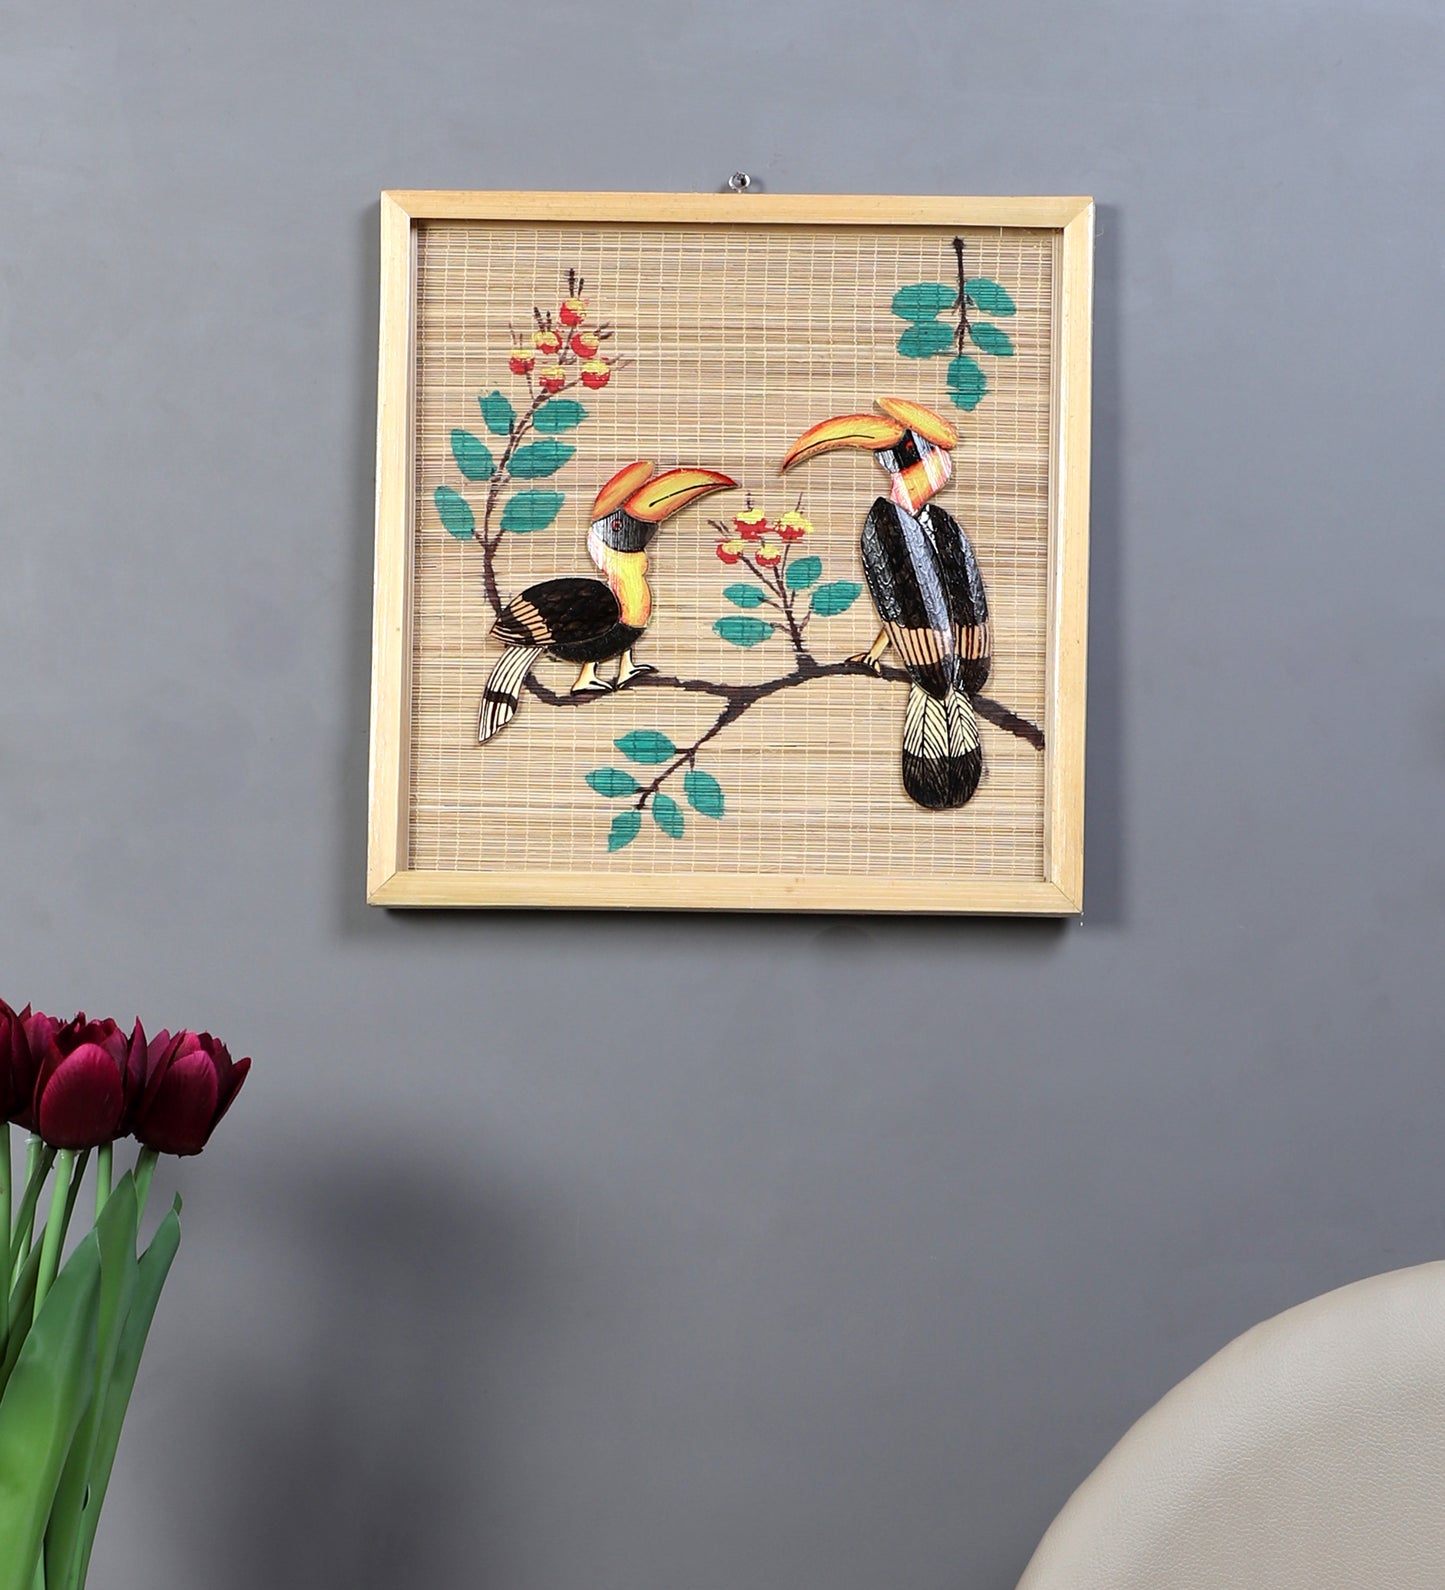 Bamboo Wall Hanging - Small (30 x 30 cm)